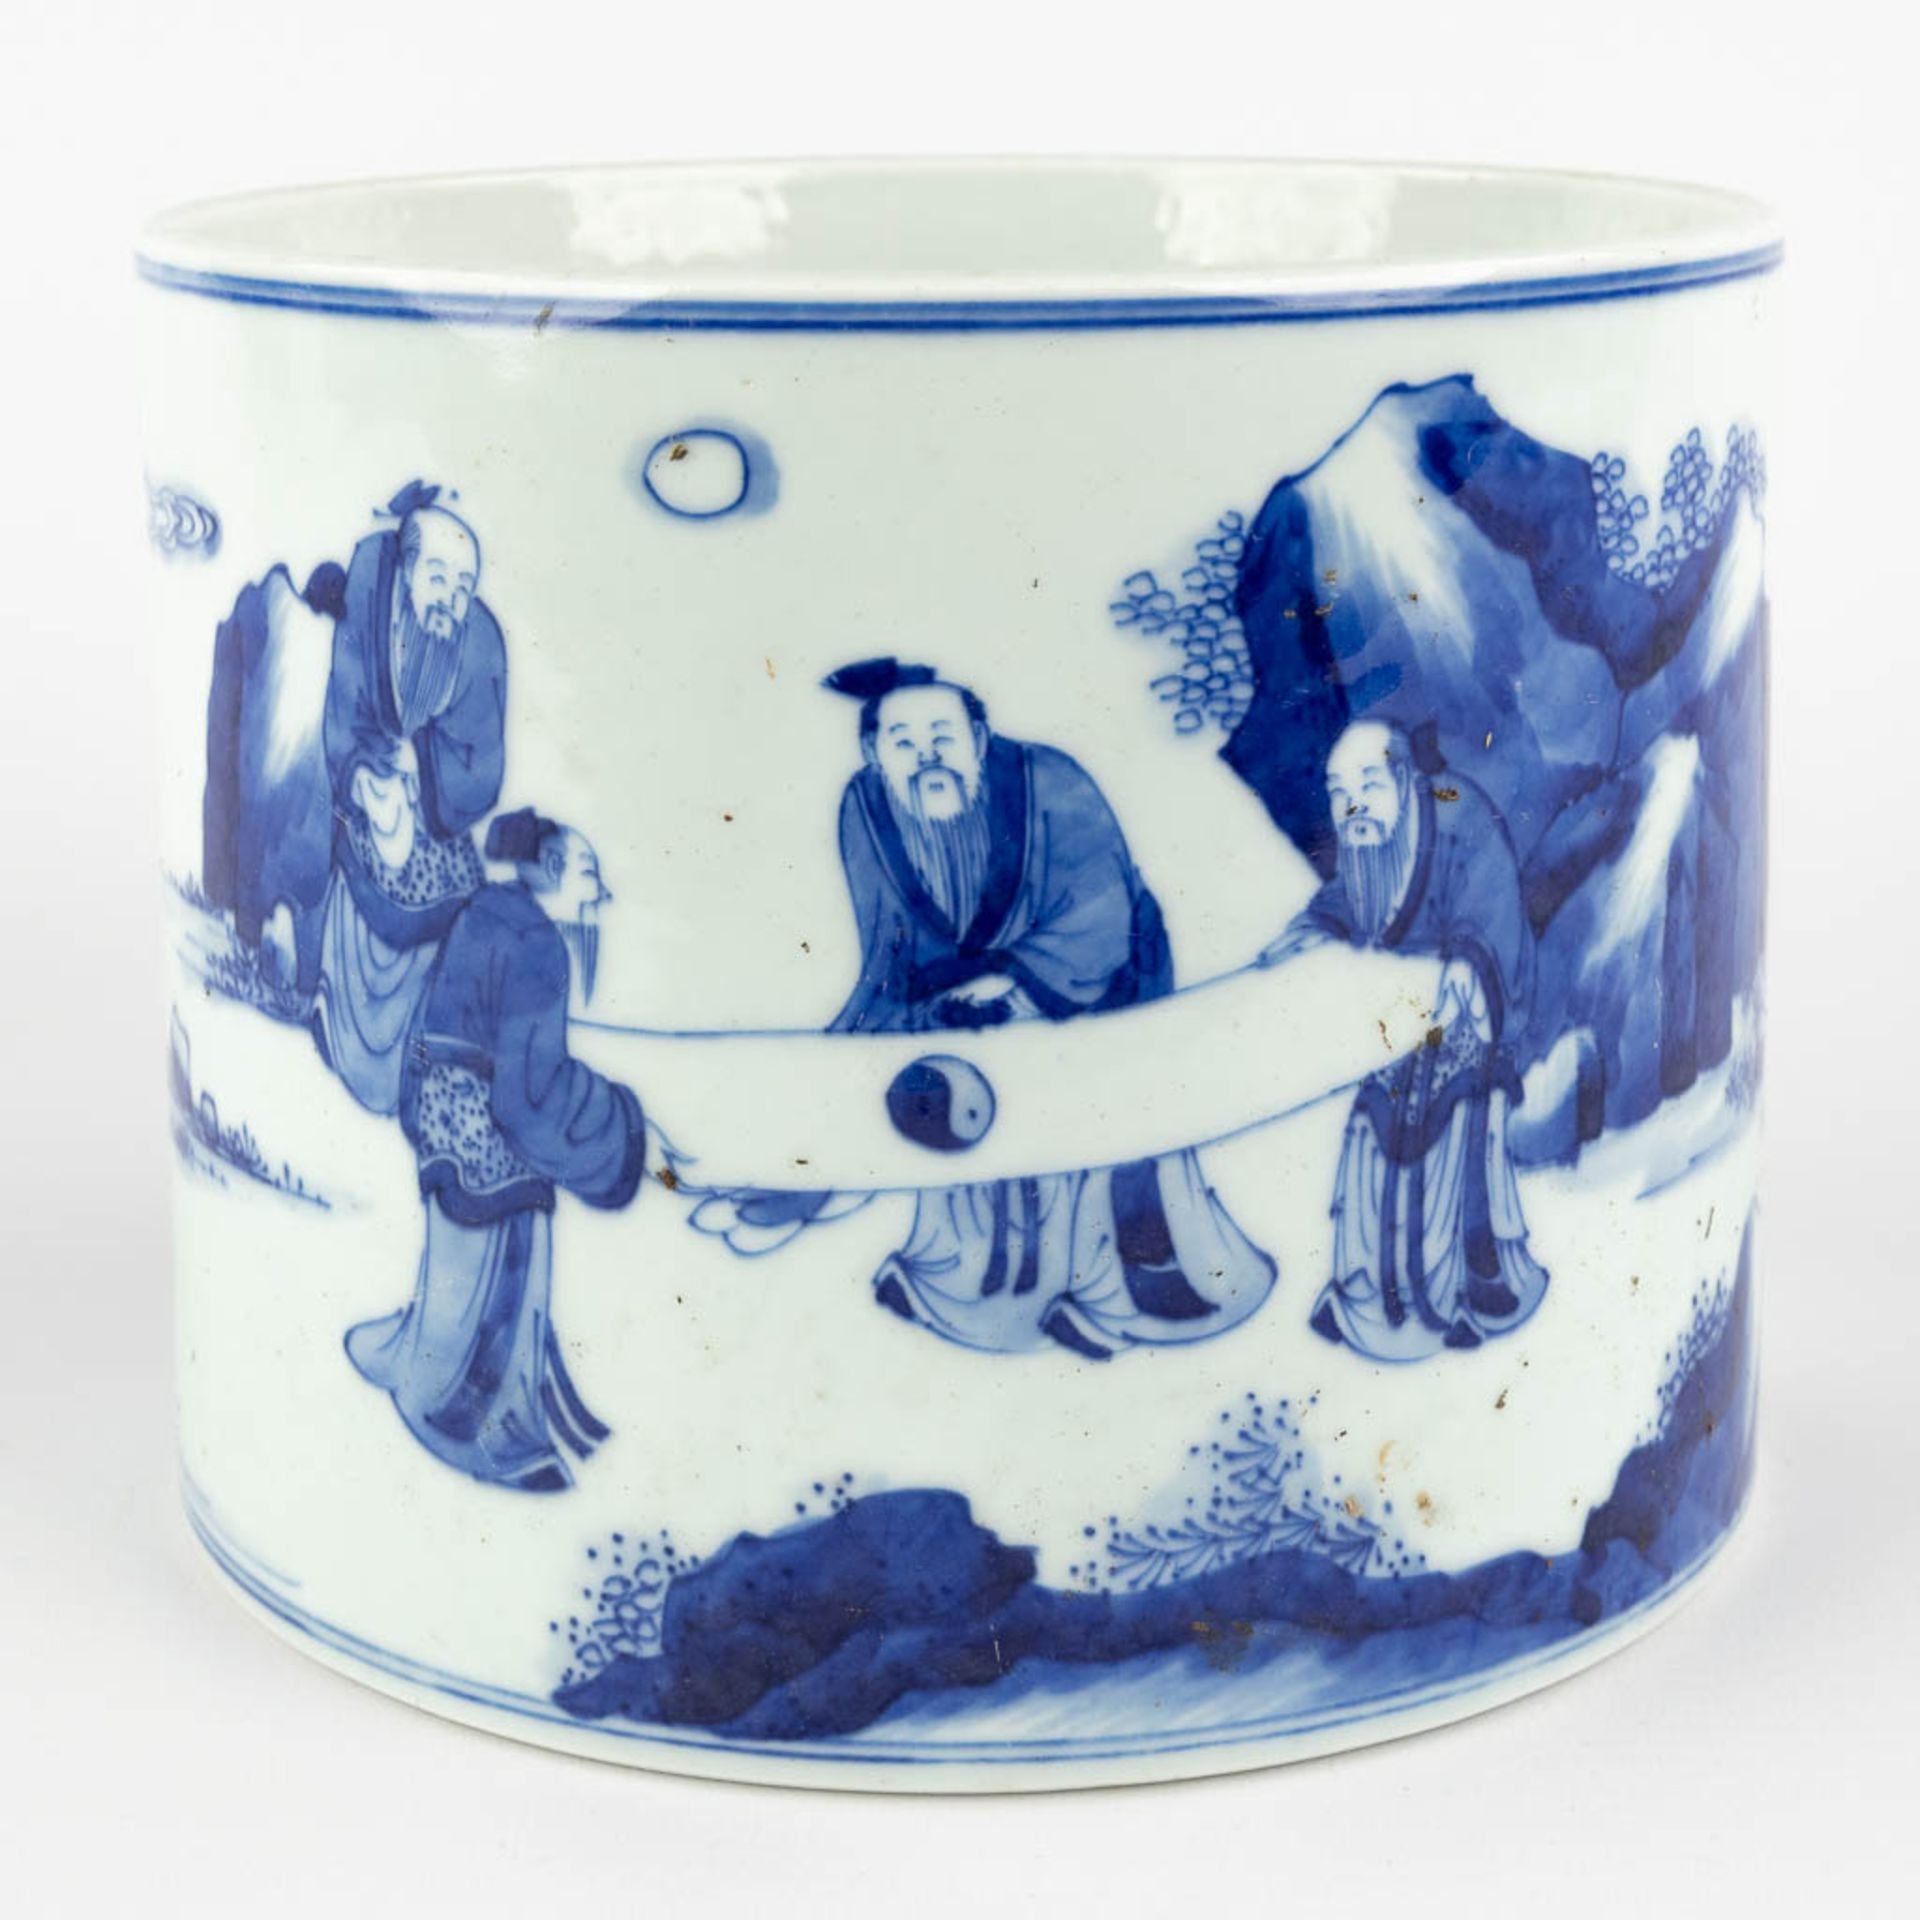 A Chinese pot, blue-white decor of wise men holding a cloth, 19th C. (H:15,5 x D:20 cm)